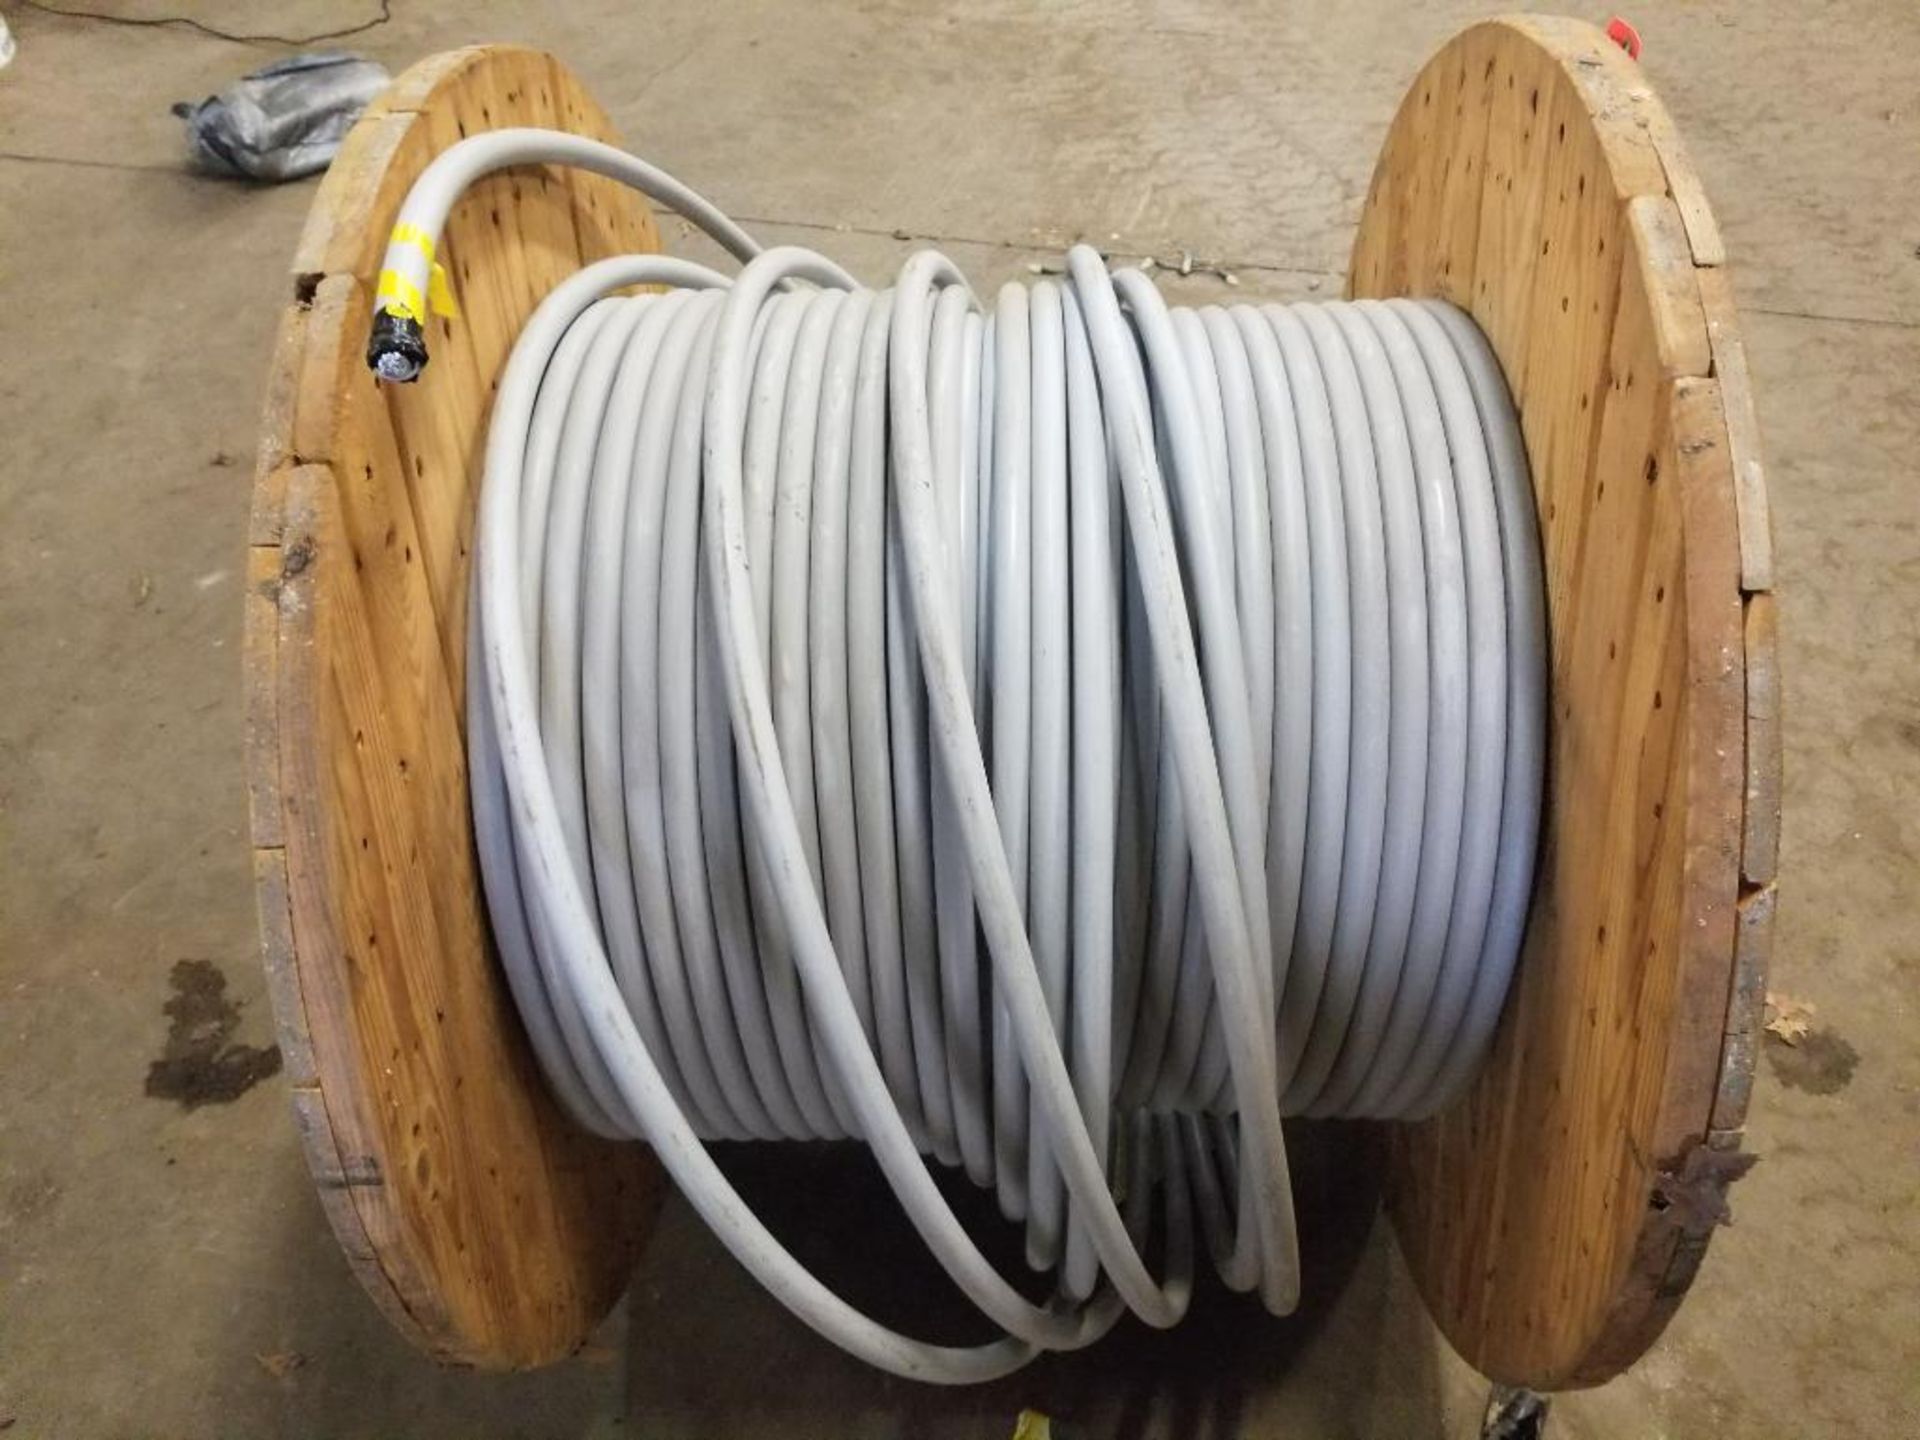 Spool of 15kV Hendrick spacer cable system wire 336, AAC-19X-PACT-15kV-75-3lyr. - Image 4 of 6